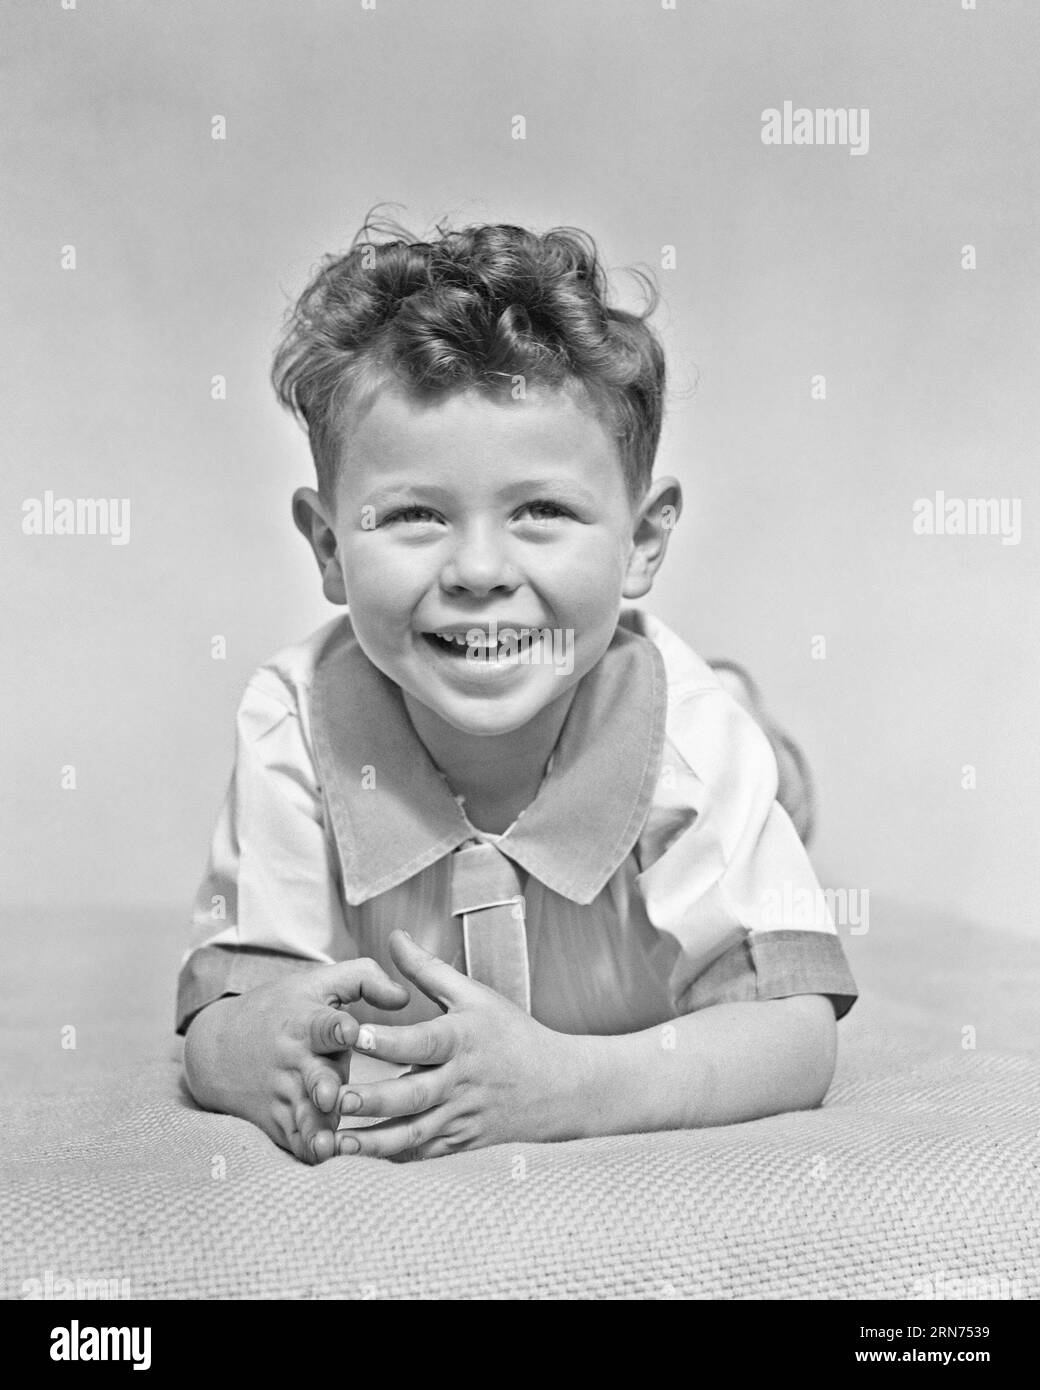 1940s CUTE LITTLE BOY WITH CURLY HAIR SMILING AND LOOKING AT THE CAMERA - j9342 HAR001 HARS CHEERFUL AND EXCITEMENT CURLY SMILES JOYFUL NECK TIE BABY BOY ETON COLLAR PLEASANT AGREEABLE CHARMING GROWTH JUVENILES LOVABLE PLEASING ADORABLE APPEALING BLACK AND WHITE CAUCASIAN ETHNICITY HAR001 OLD FASHIONED Stock Photo